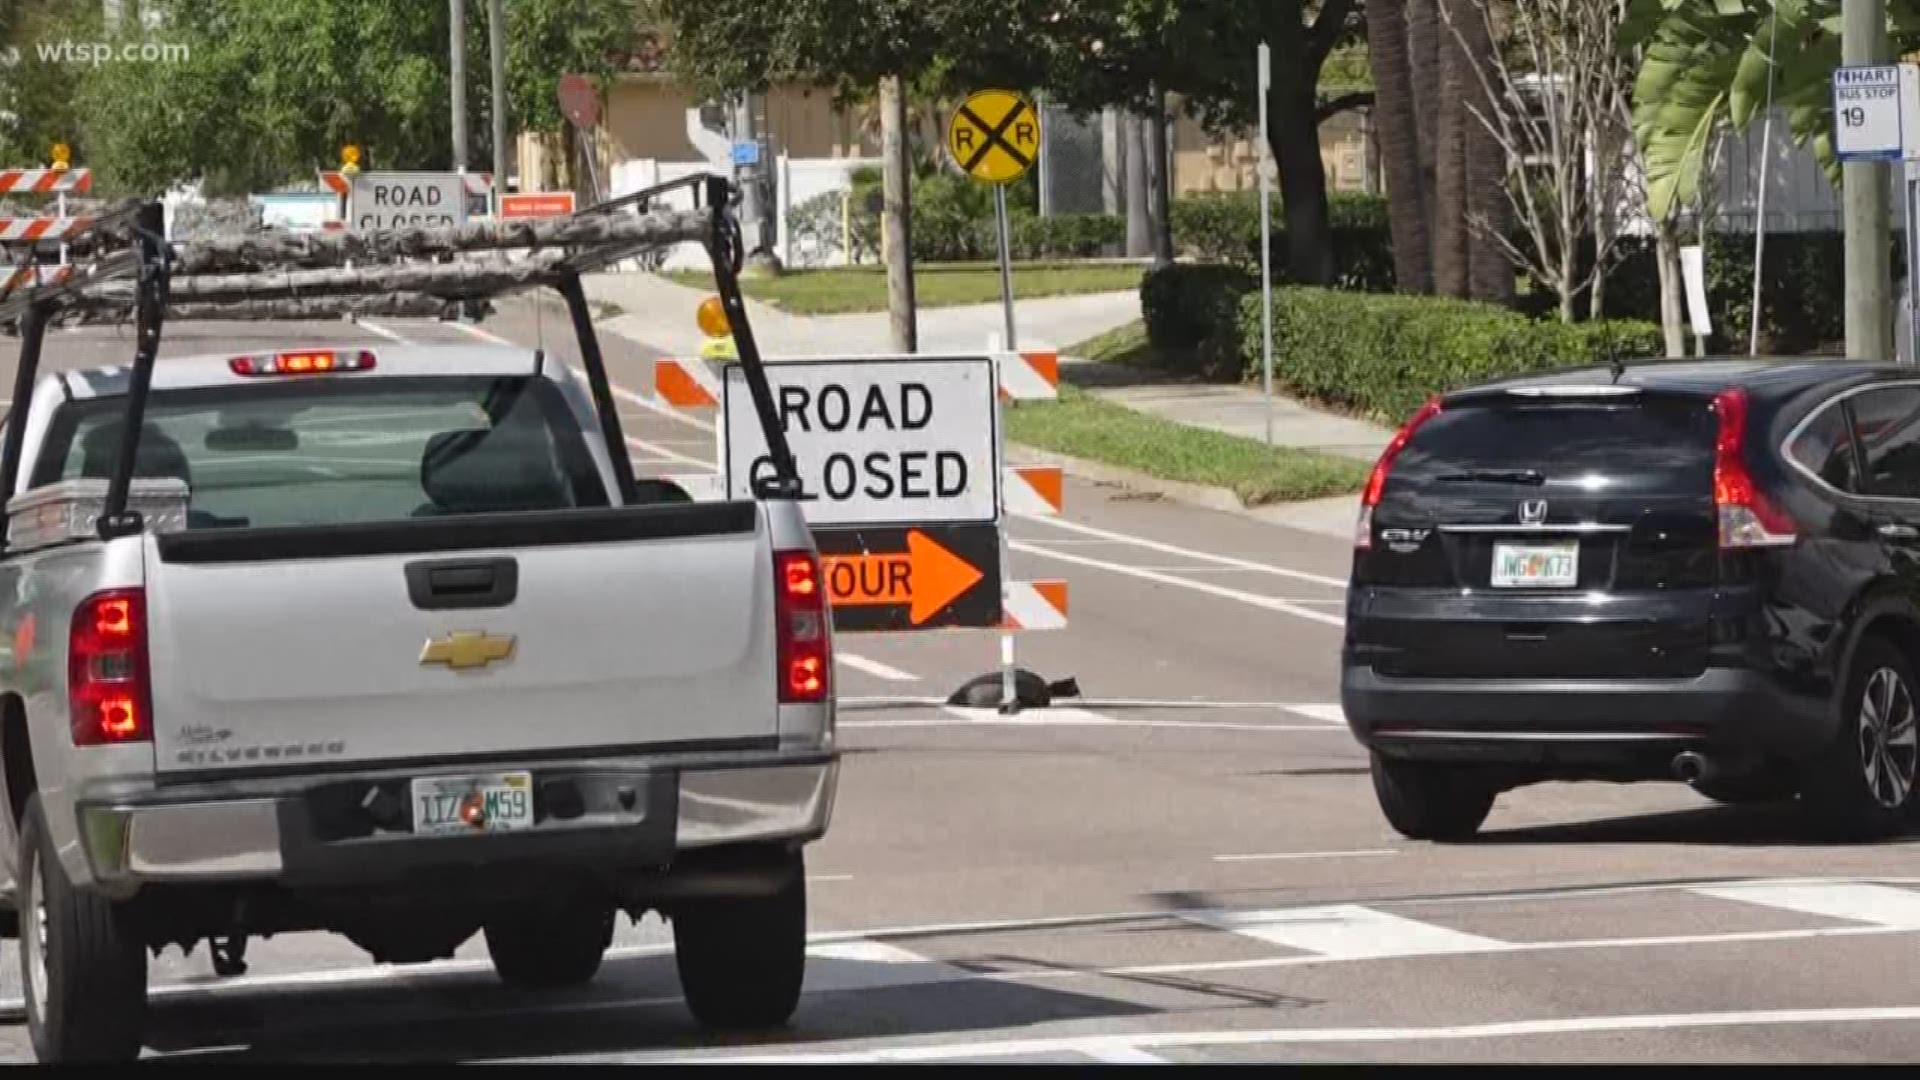 Mayor Rick Kriseman tweeted his frustration about the upcoming  -- and sudden -- closure. It comes after several closings and traffic issues in Tampa.